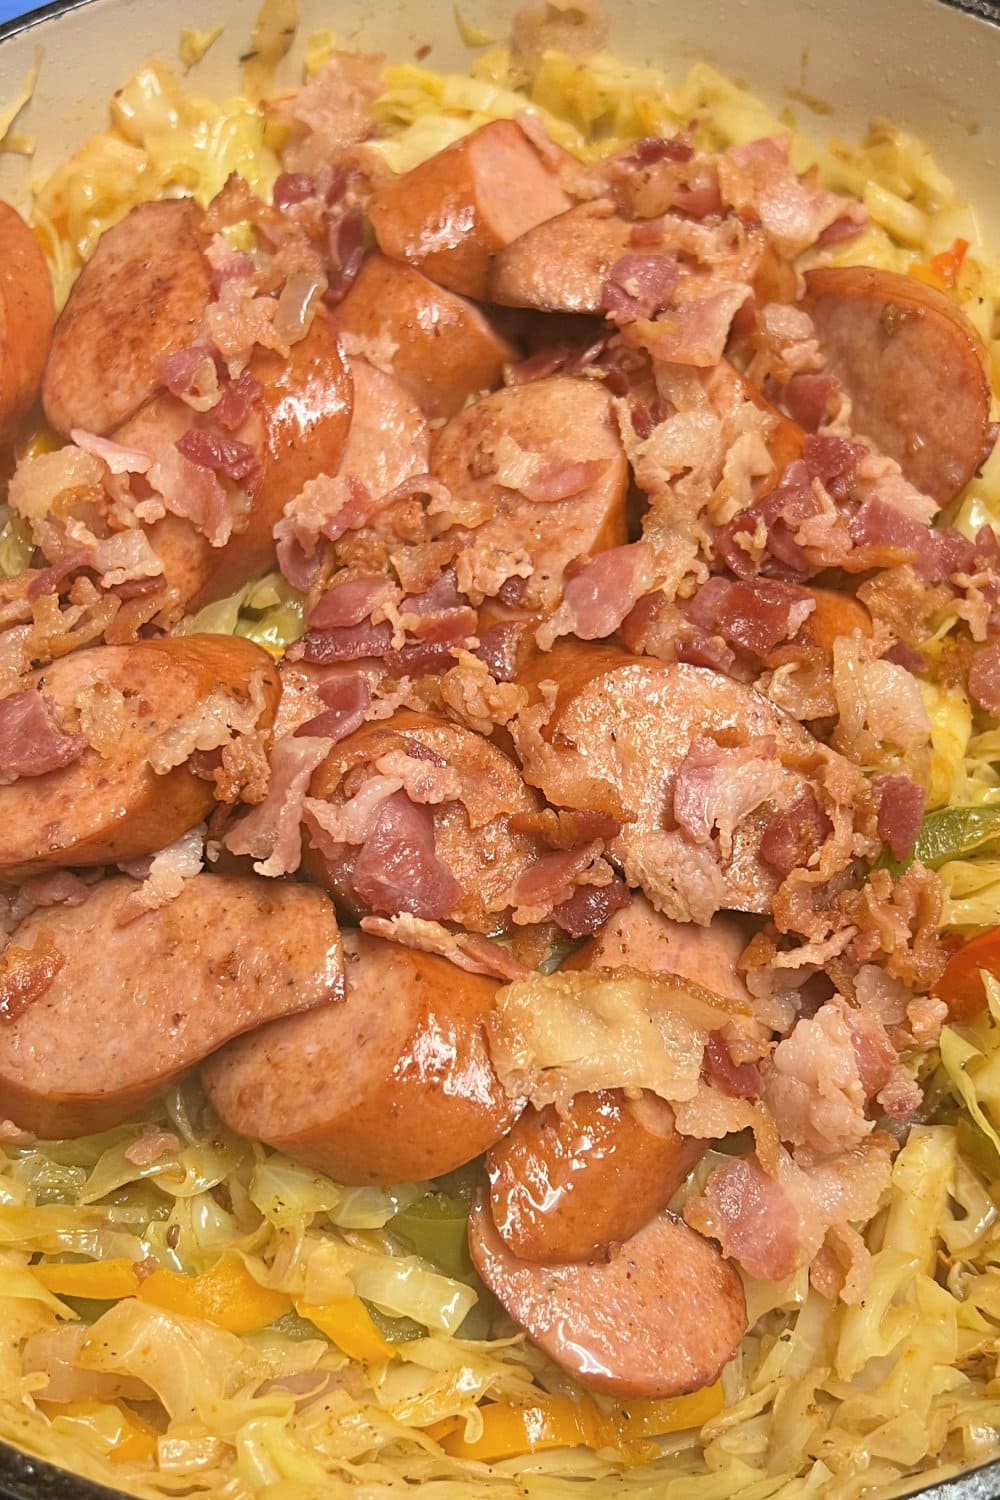 Bacon and Andouille sausage added into the sauteed cabbage and vegetables. 